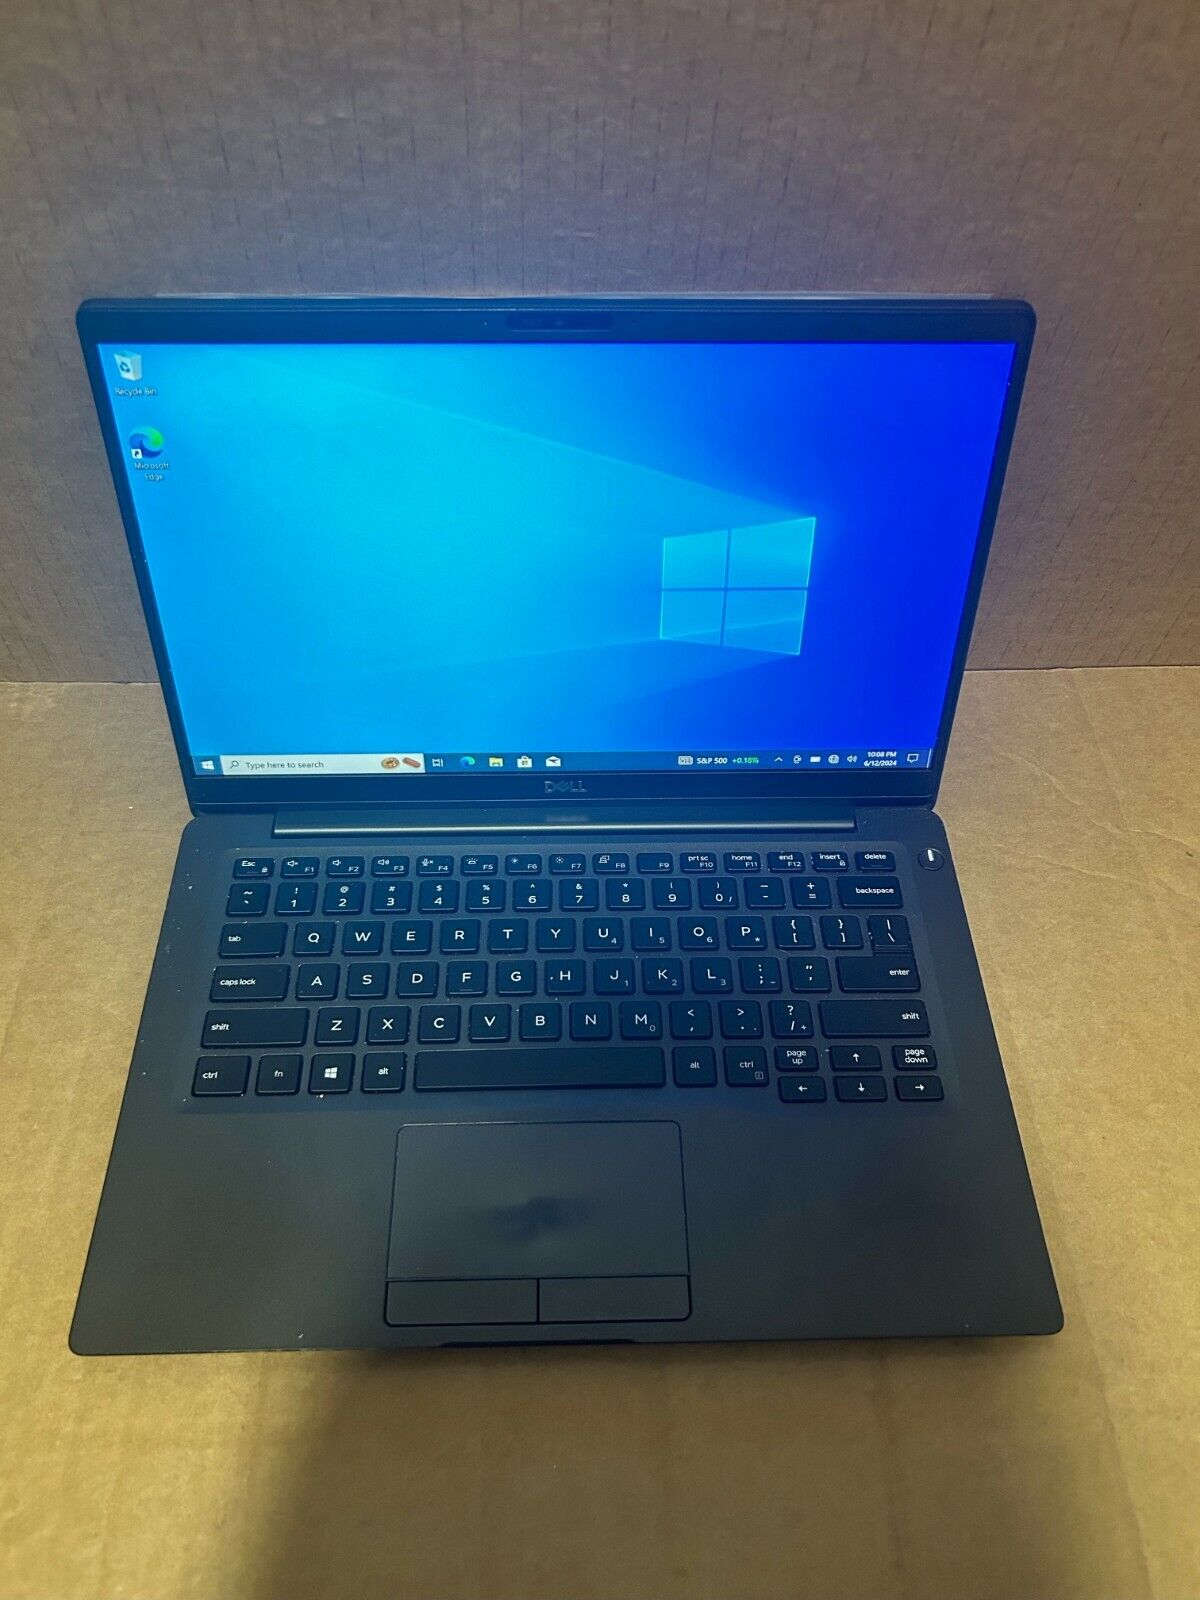 Dell Latitude 7400 i7-8665U 512GB SSD 16GB RAM (No Charger Included)